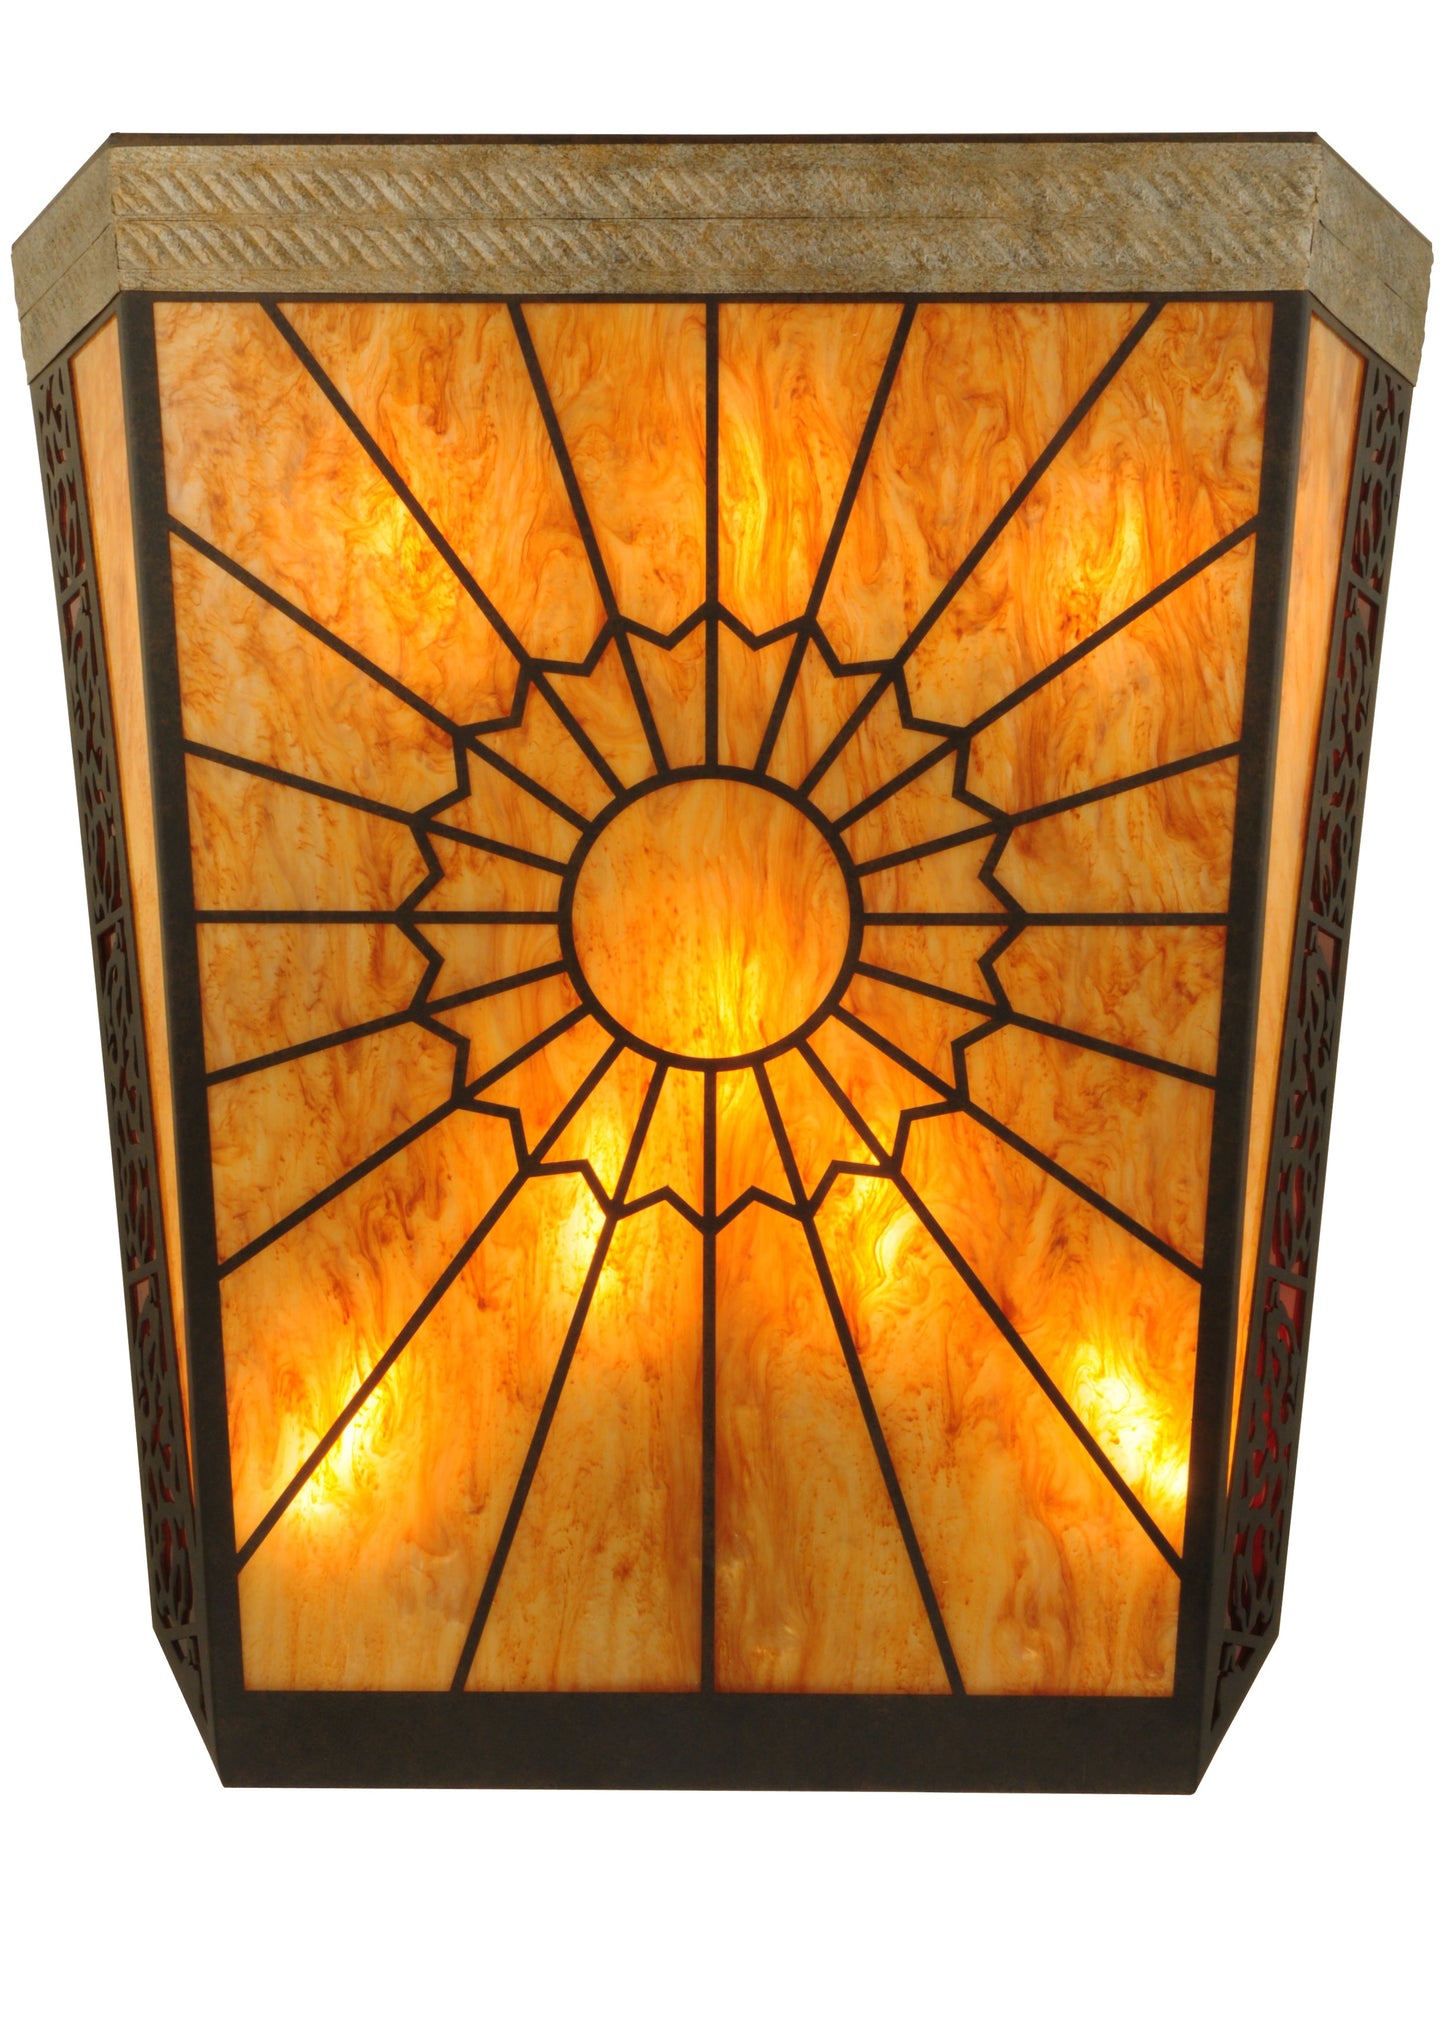 30" Zuvan Wall Sconce by 2nd Ave Lighting